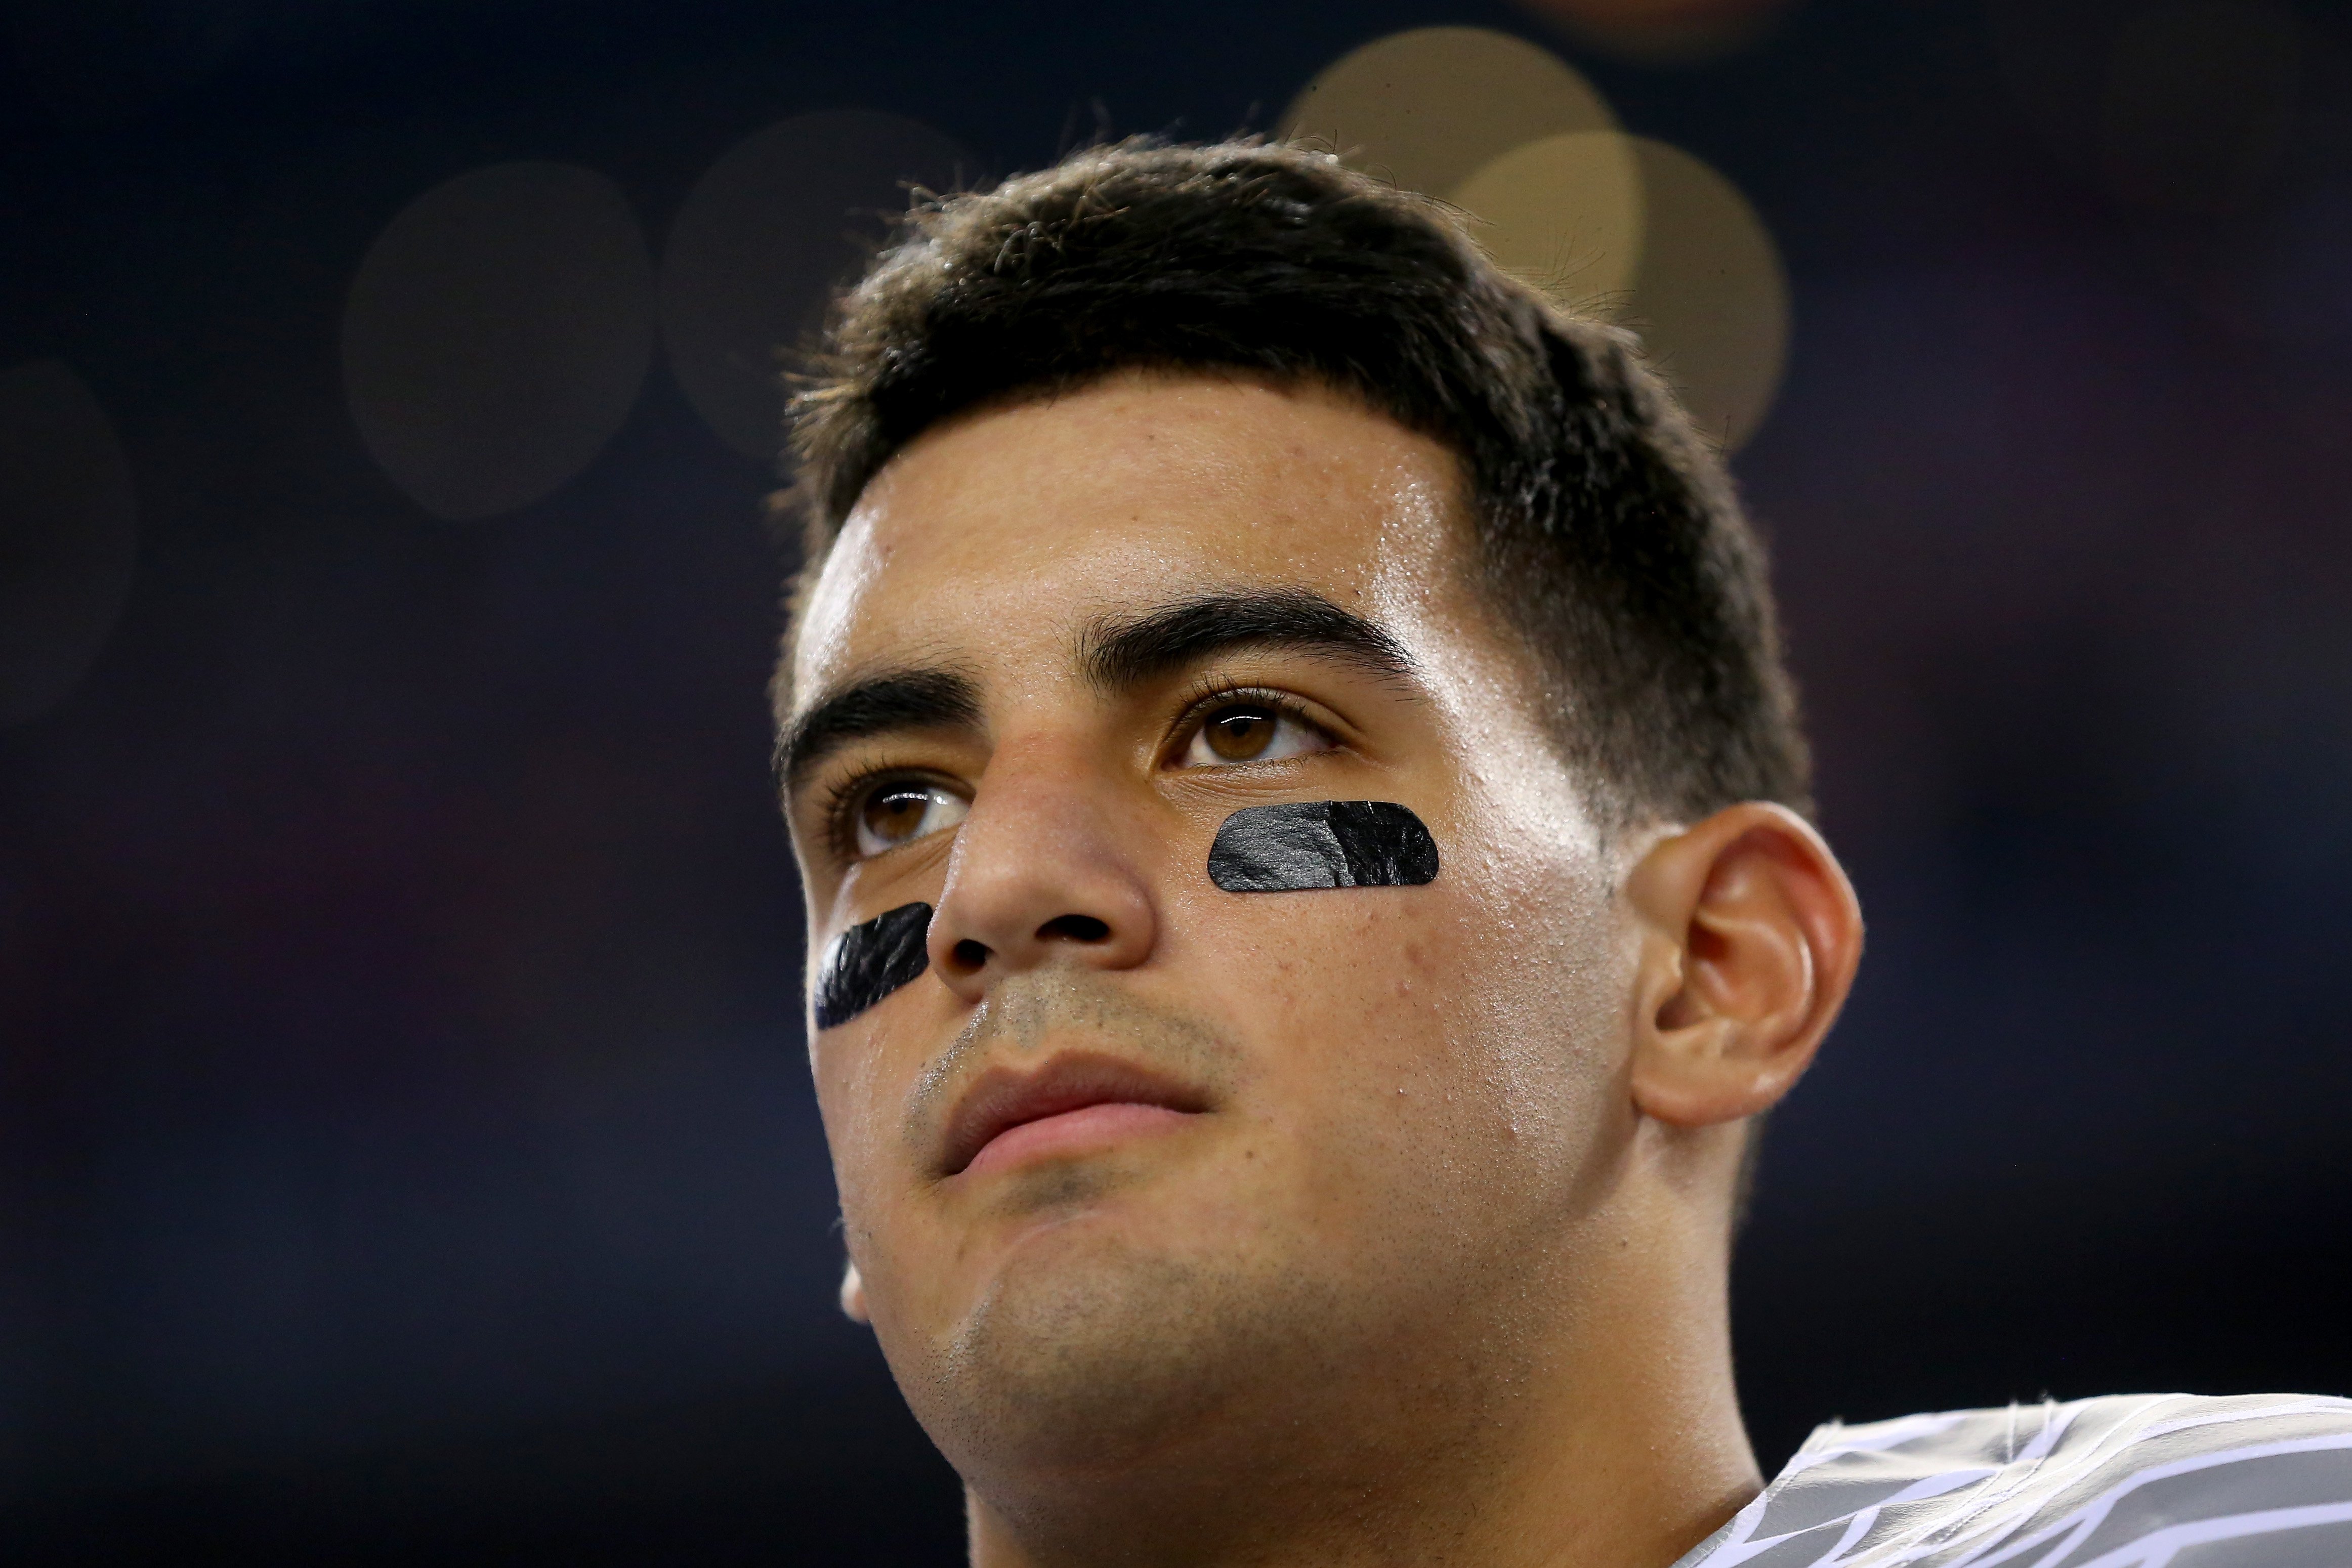 Quarterback Marcus Mariota #8 of the Oregon Ducks looks on during the national anthem before the College Football Playoff National Championship Game on Jan. 12, 2015 in Arlington, Texas. (Ronald Martinez—Getty Images)